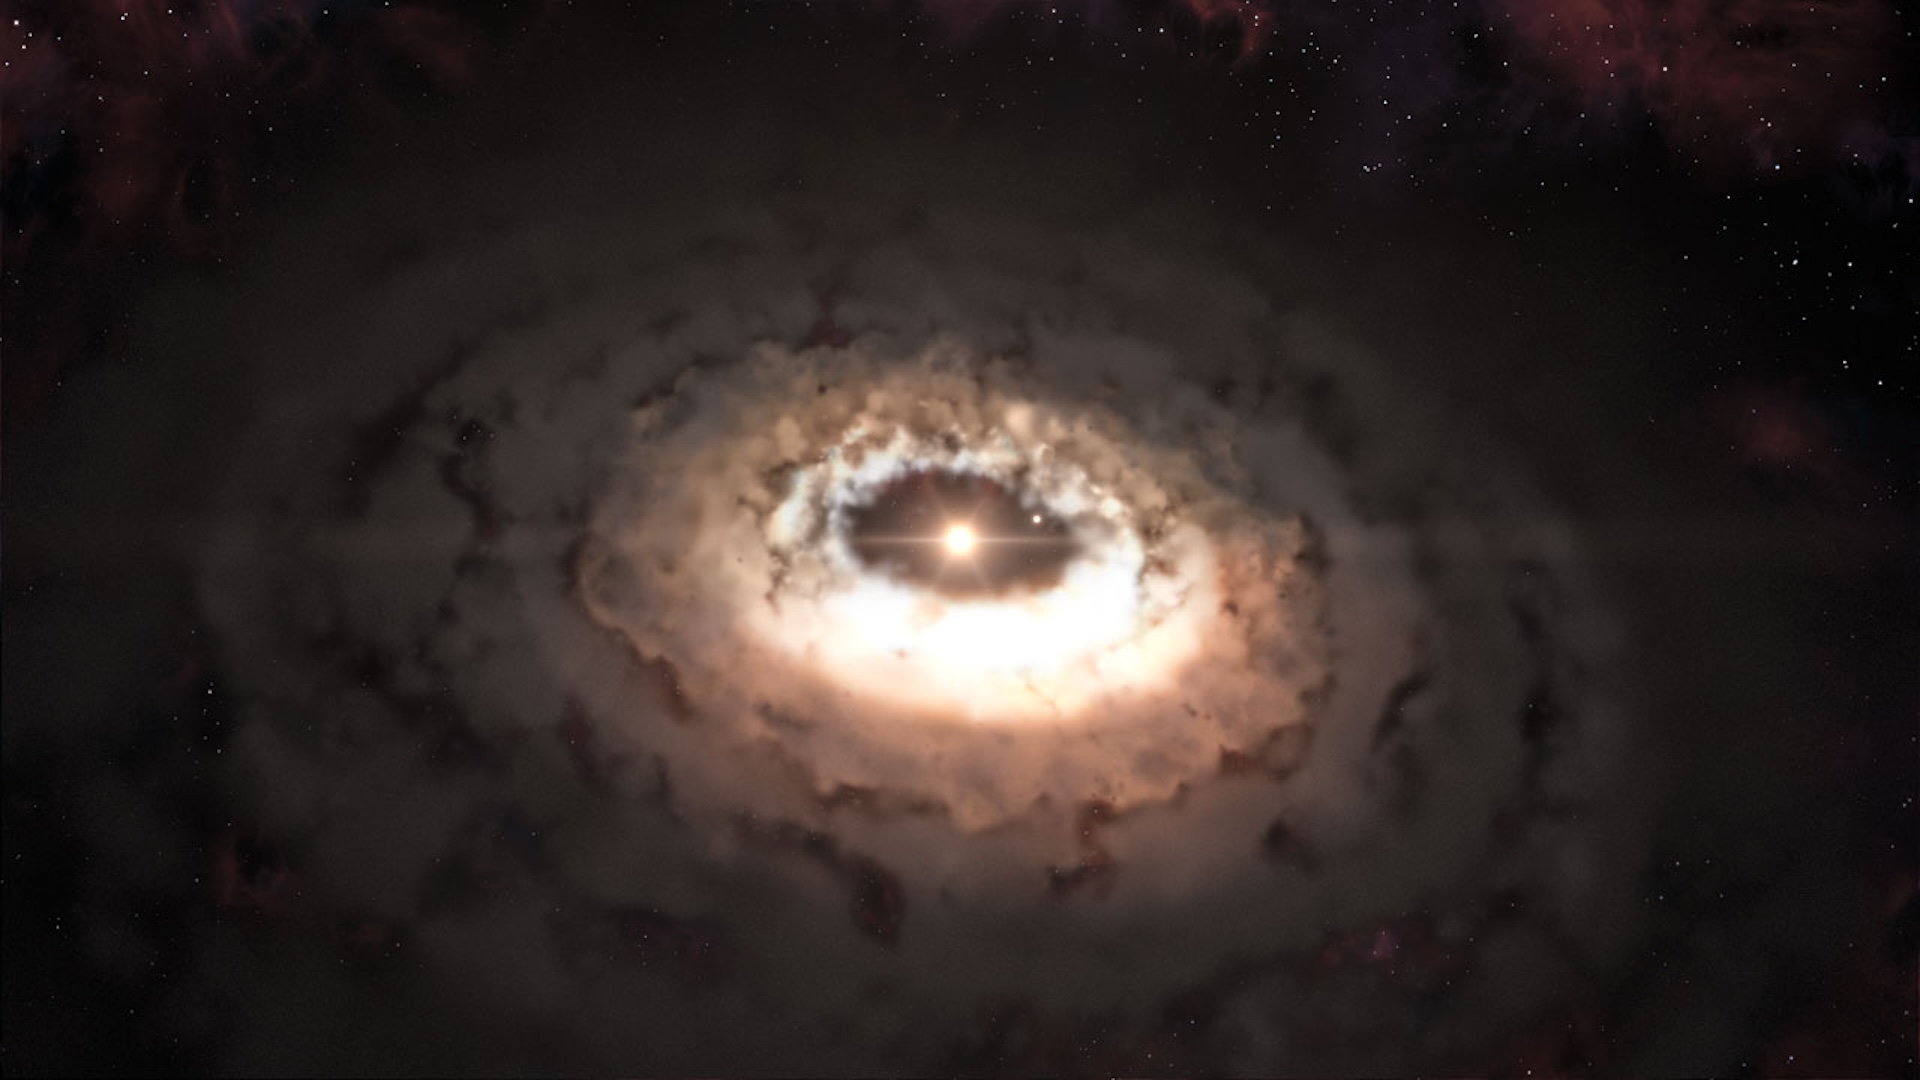  The building blocks of life can form rapidly around young stars 